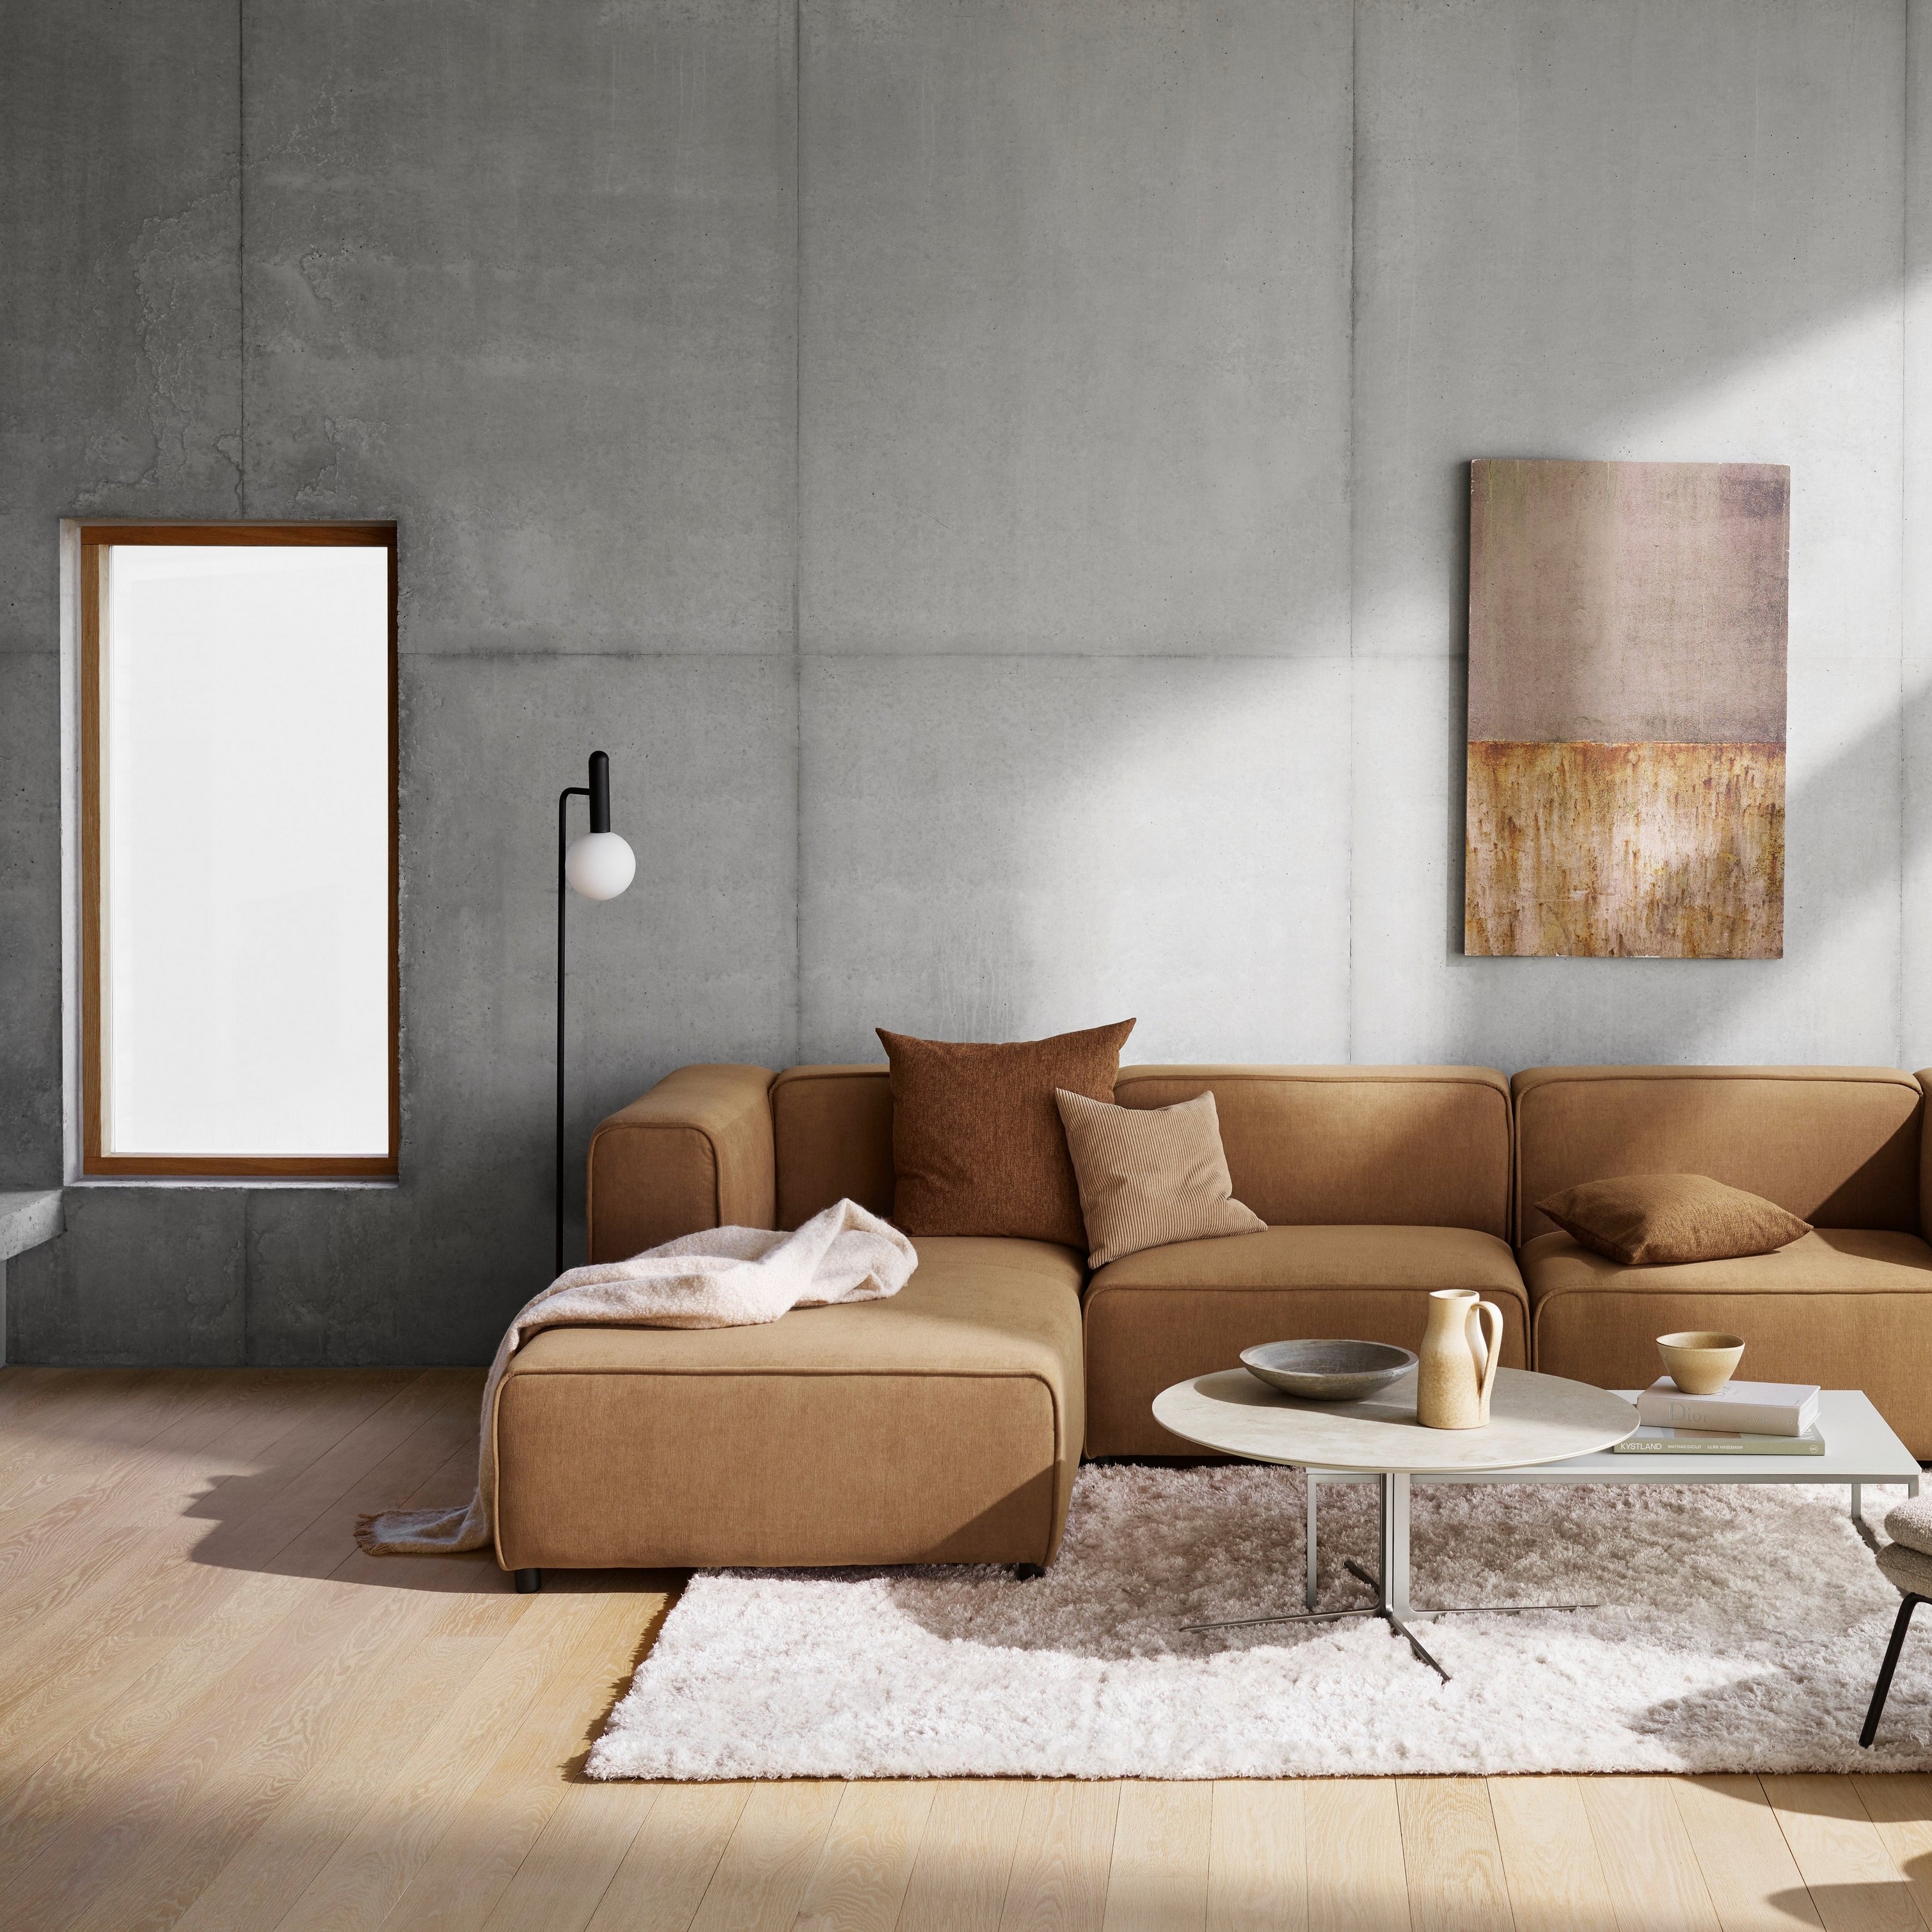 Modern living room with beige sectional sofa, abstract wall art, and plush rug on wooden floor.